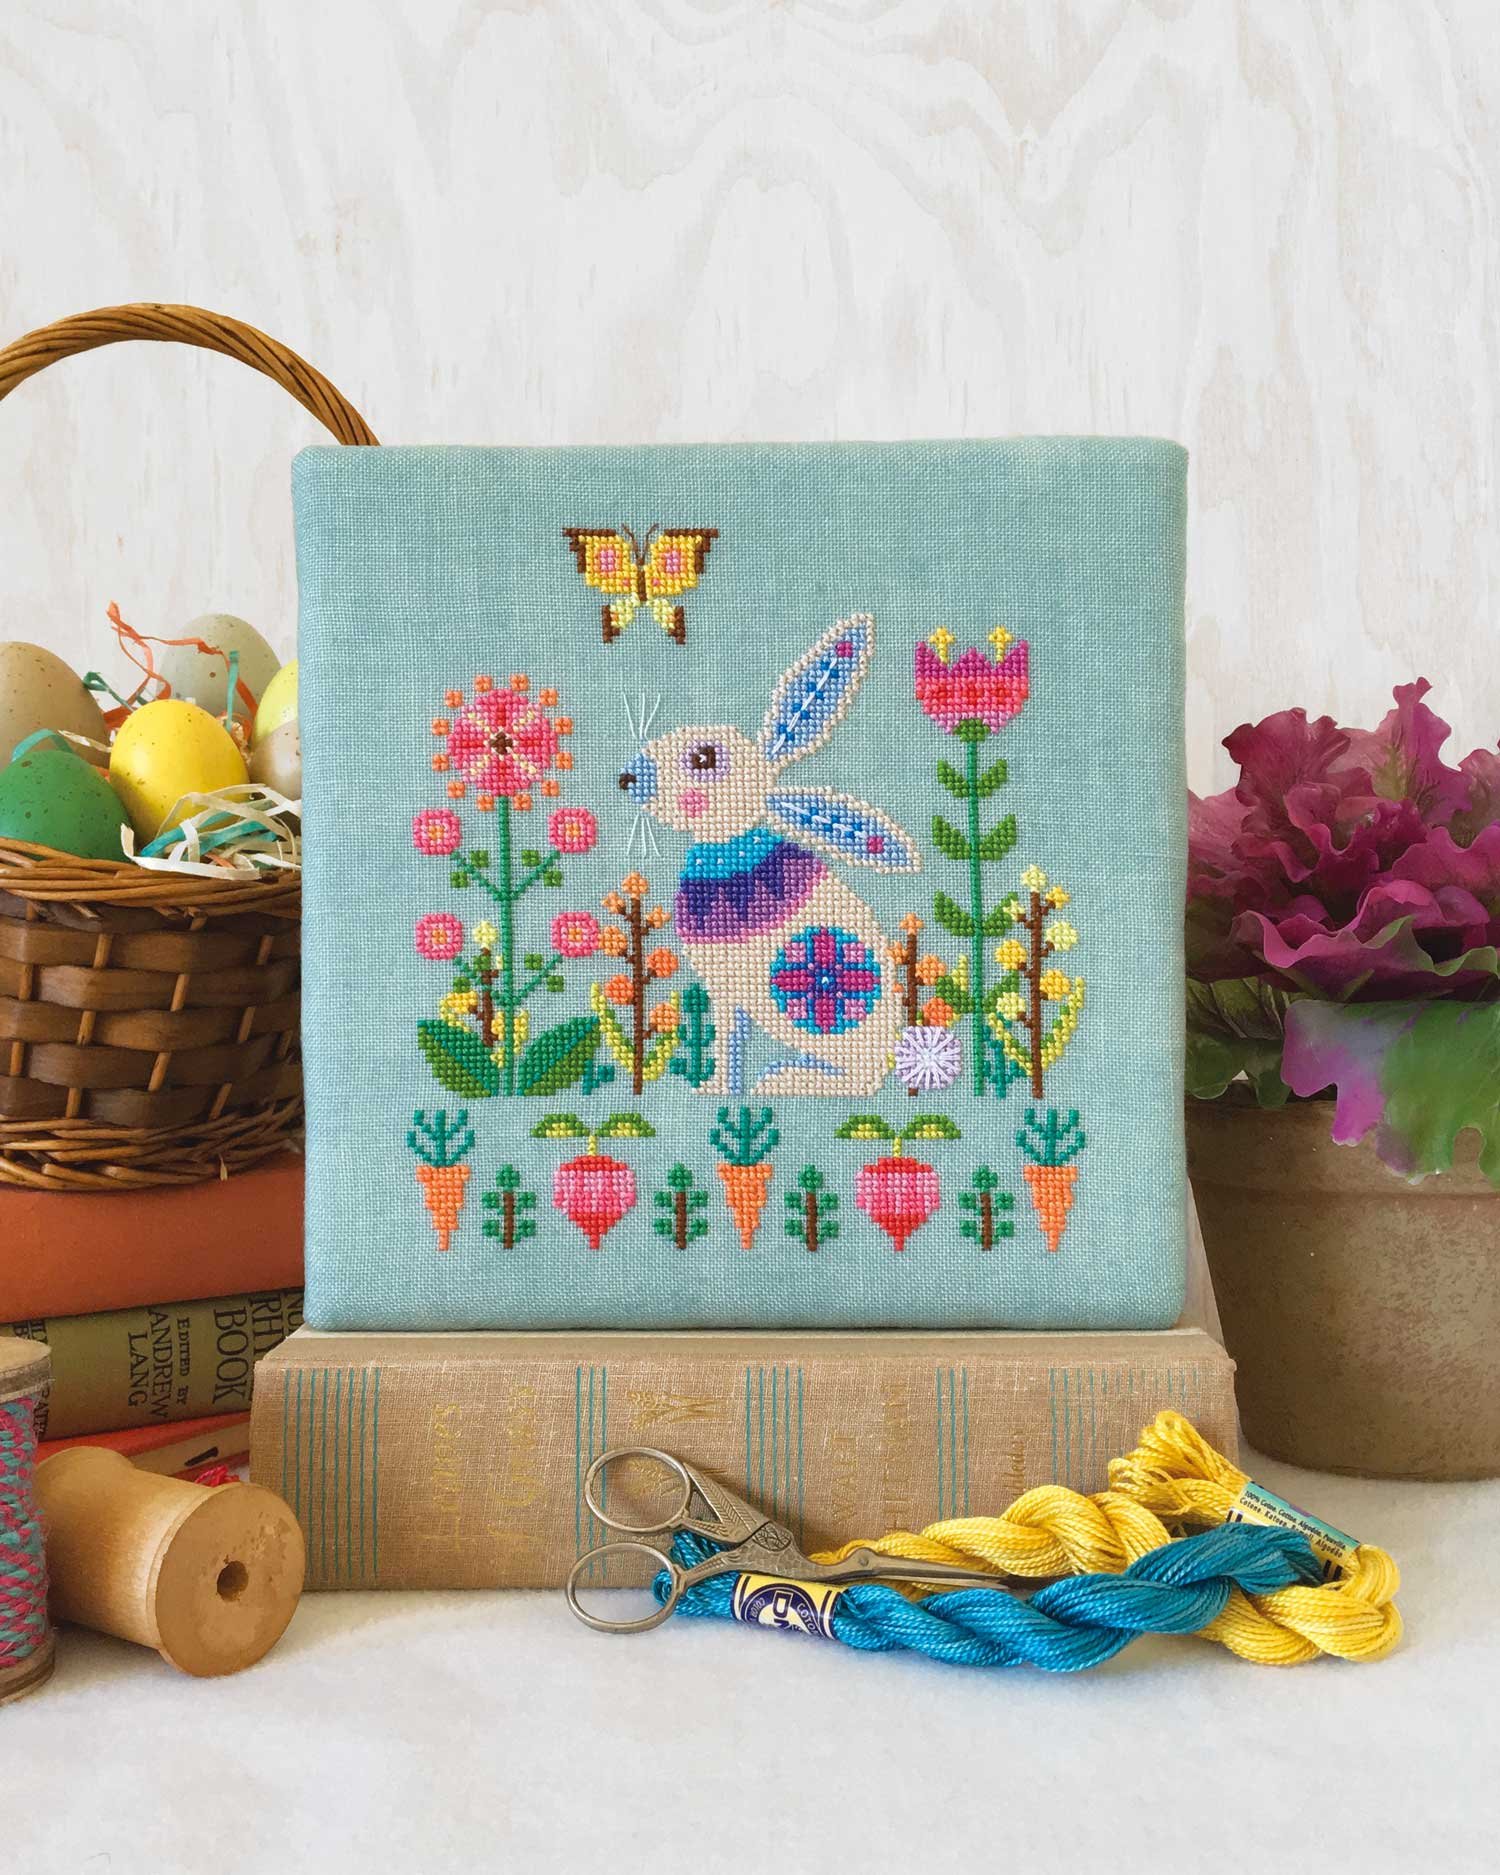 19 Floral Hand Embroidery Patterns for Spring - The Yellow Birdhouse